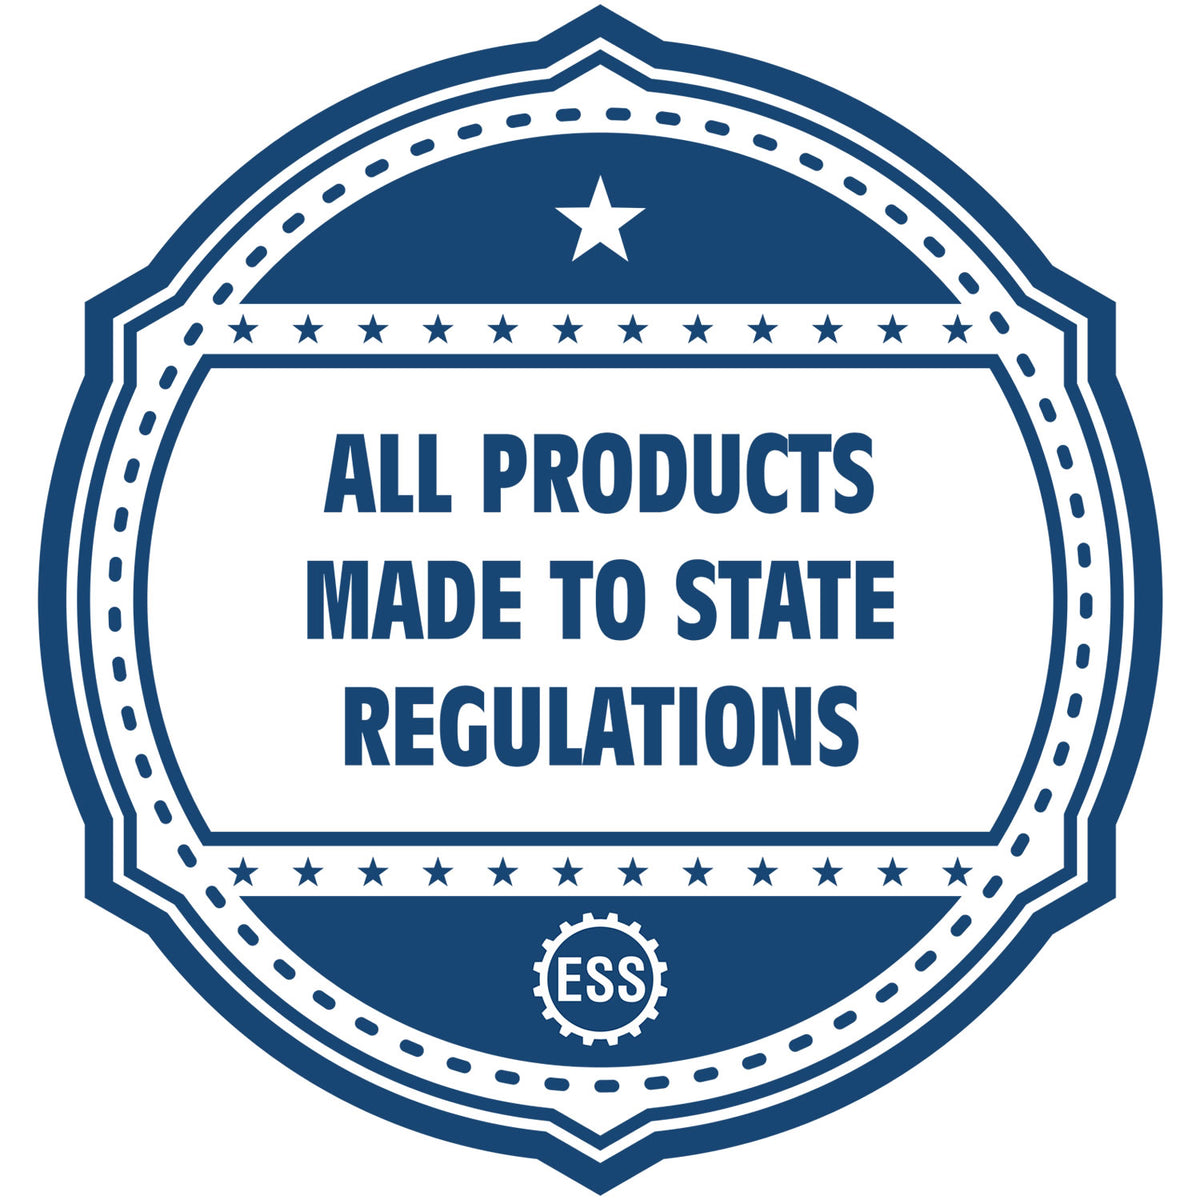 An icon or badge element for the Slim Pre-Inked New Hampshire Architect Seal Stamp showing that this product is made in compliance with state regulations.